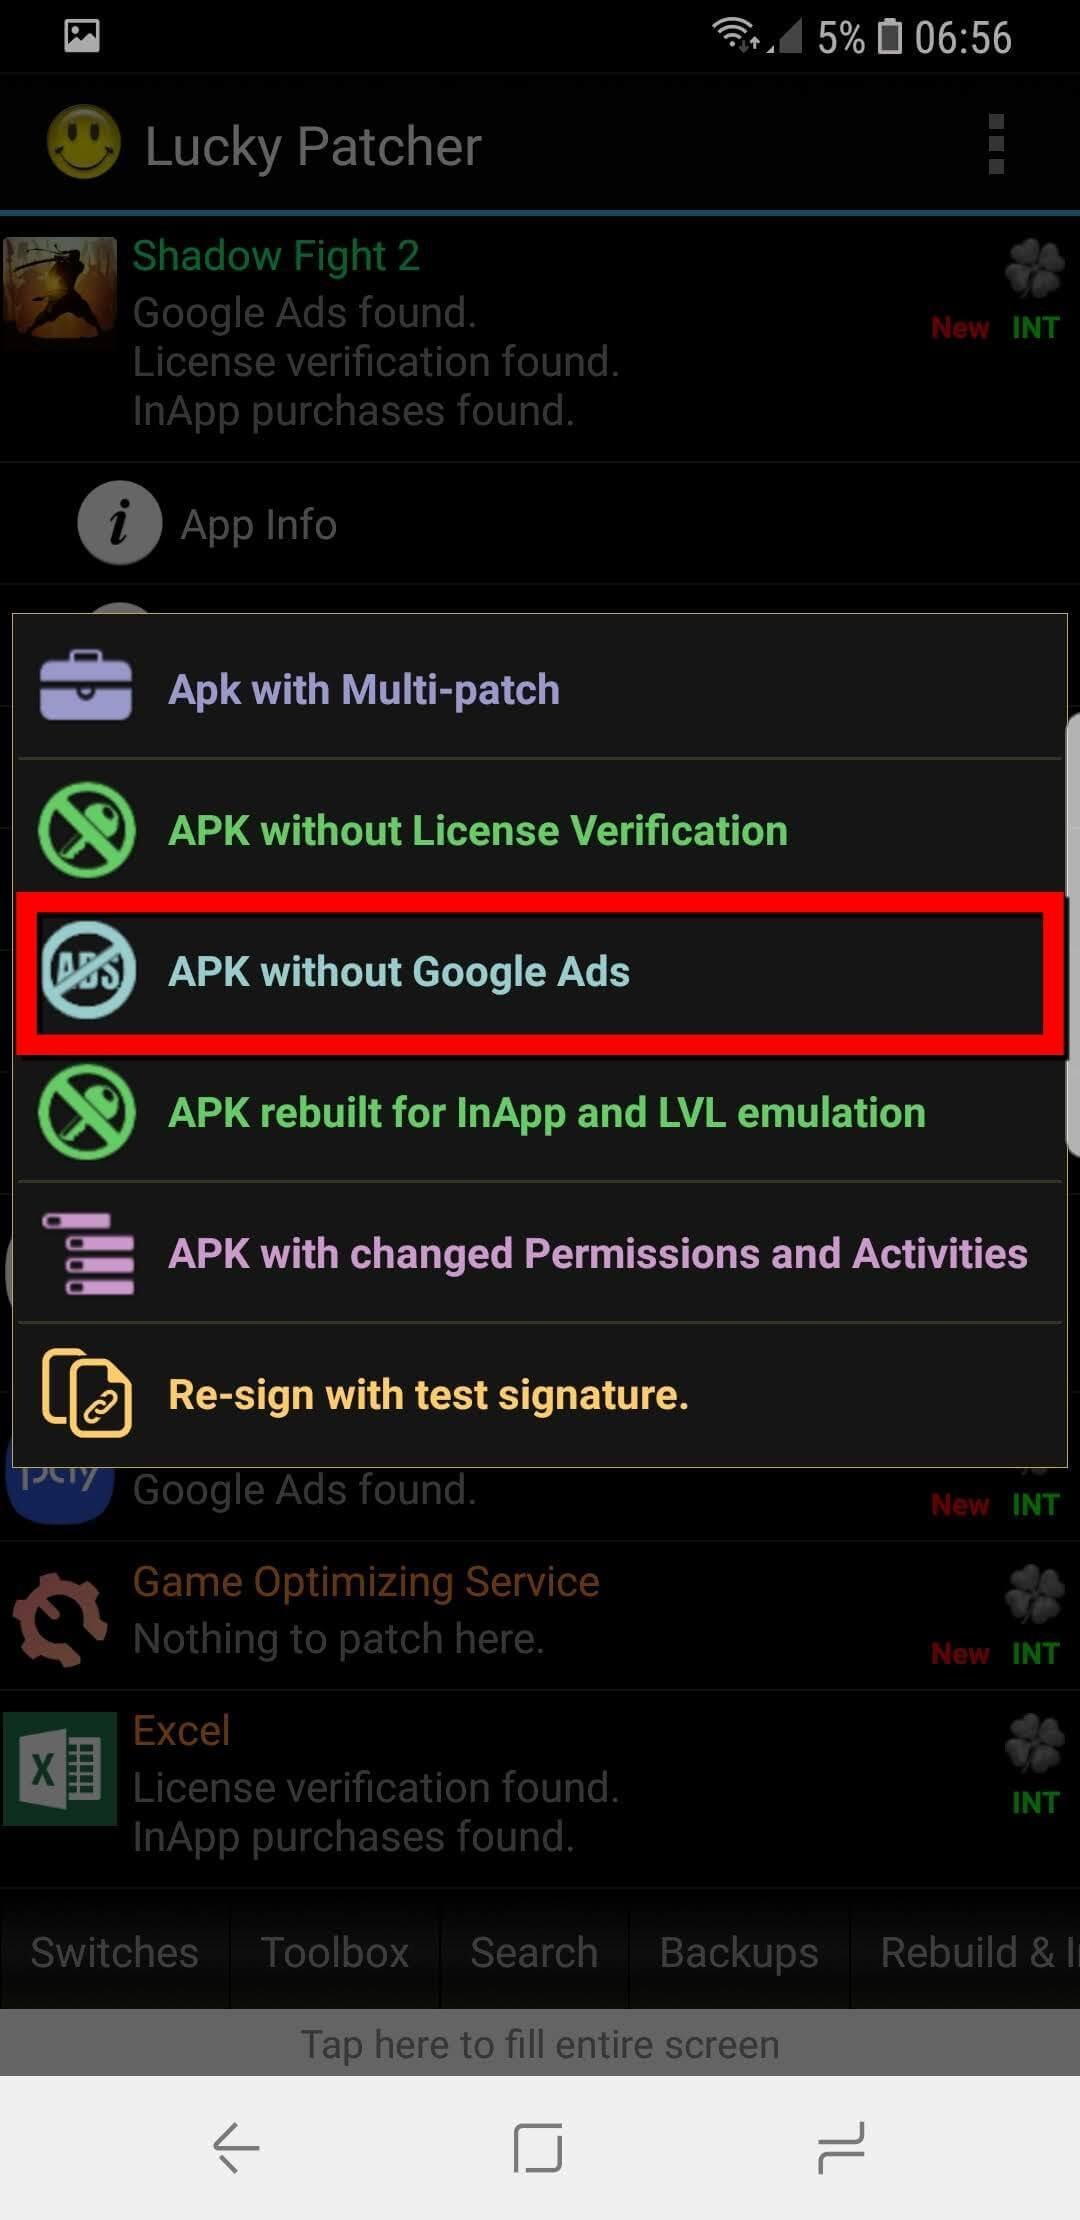 apk without Google ads